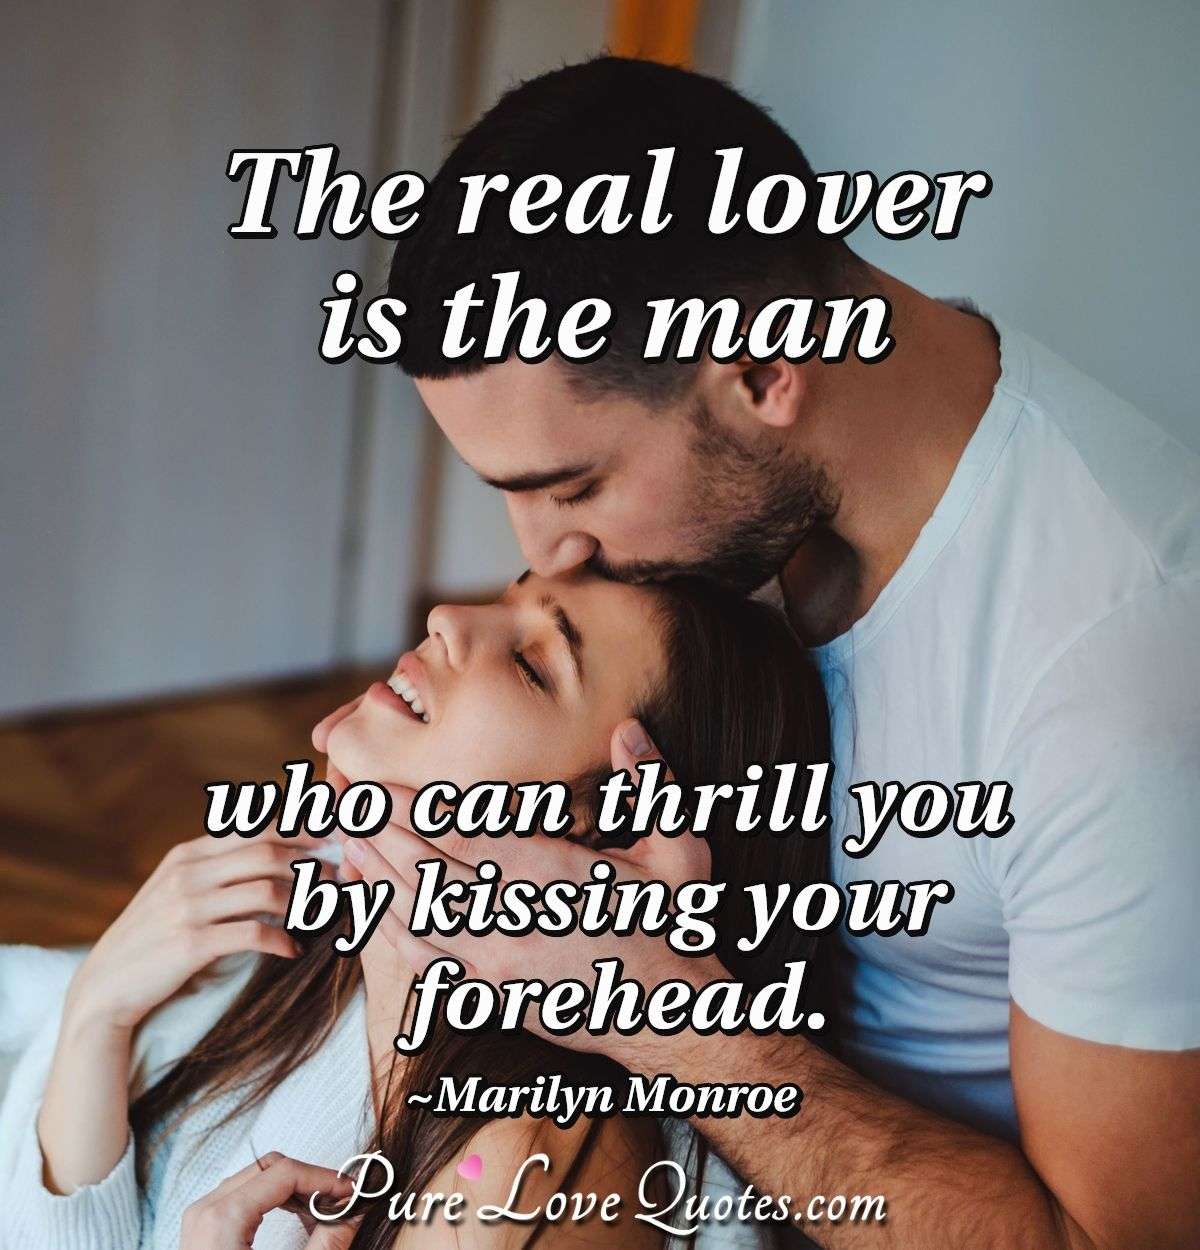 The real lover is the man who can thrill you by kissing your forehead. - Marilyn Monroe